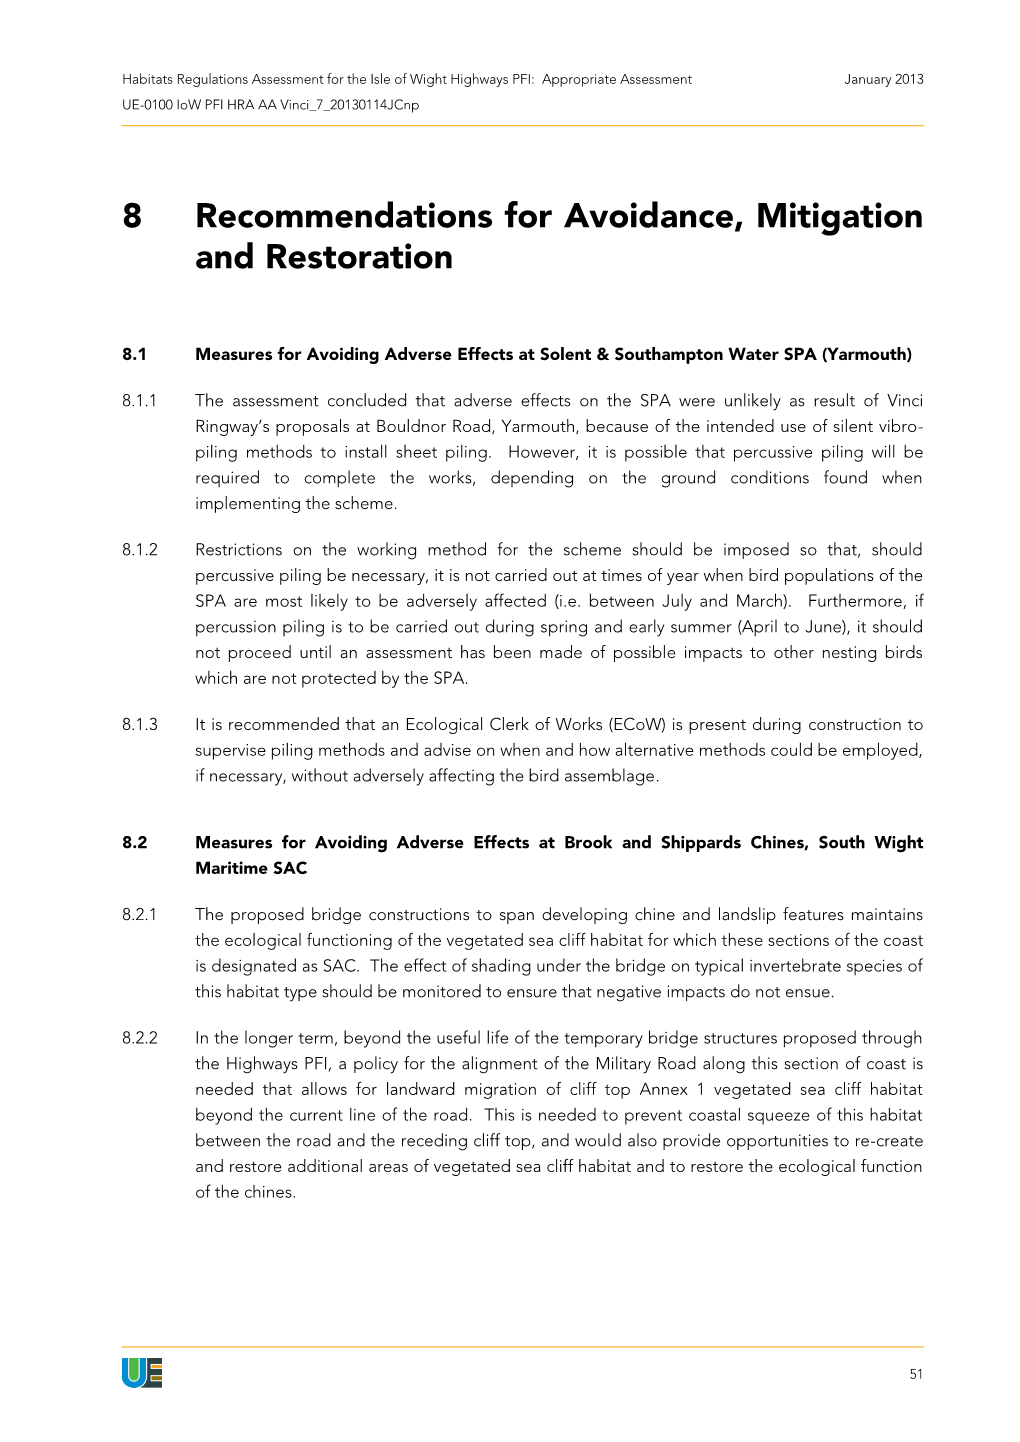 8 Recommendations for Avoidance, Mitigation and Restoration